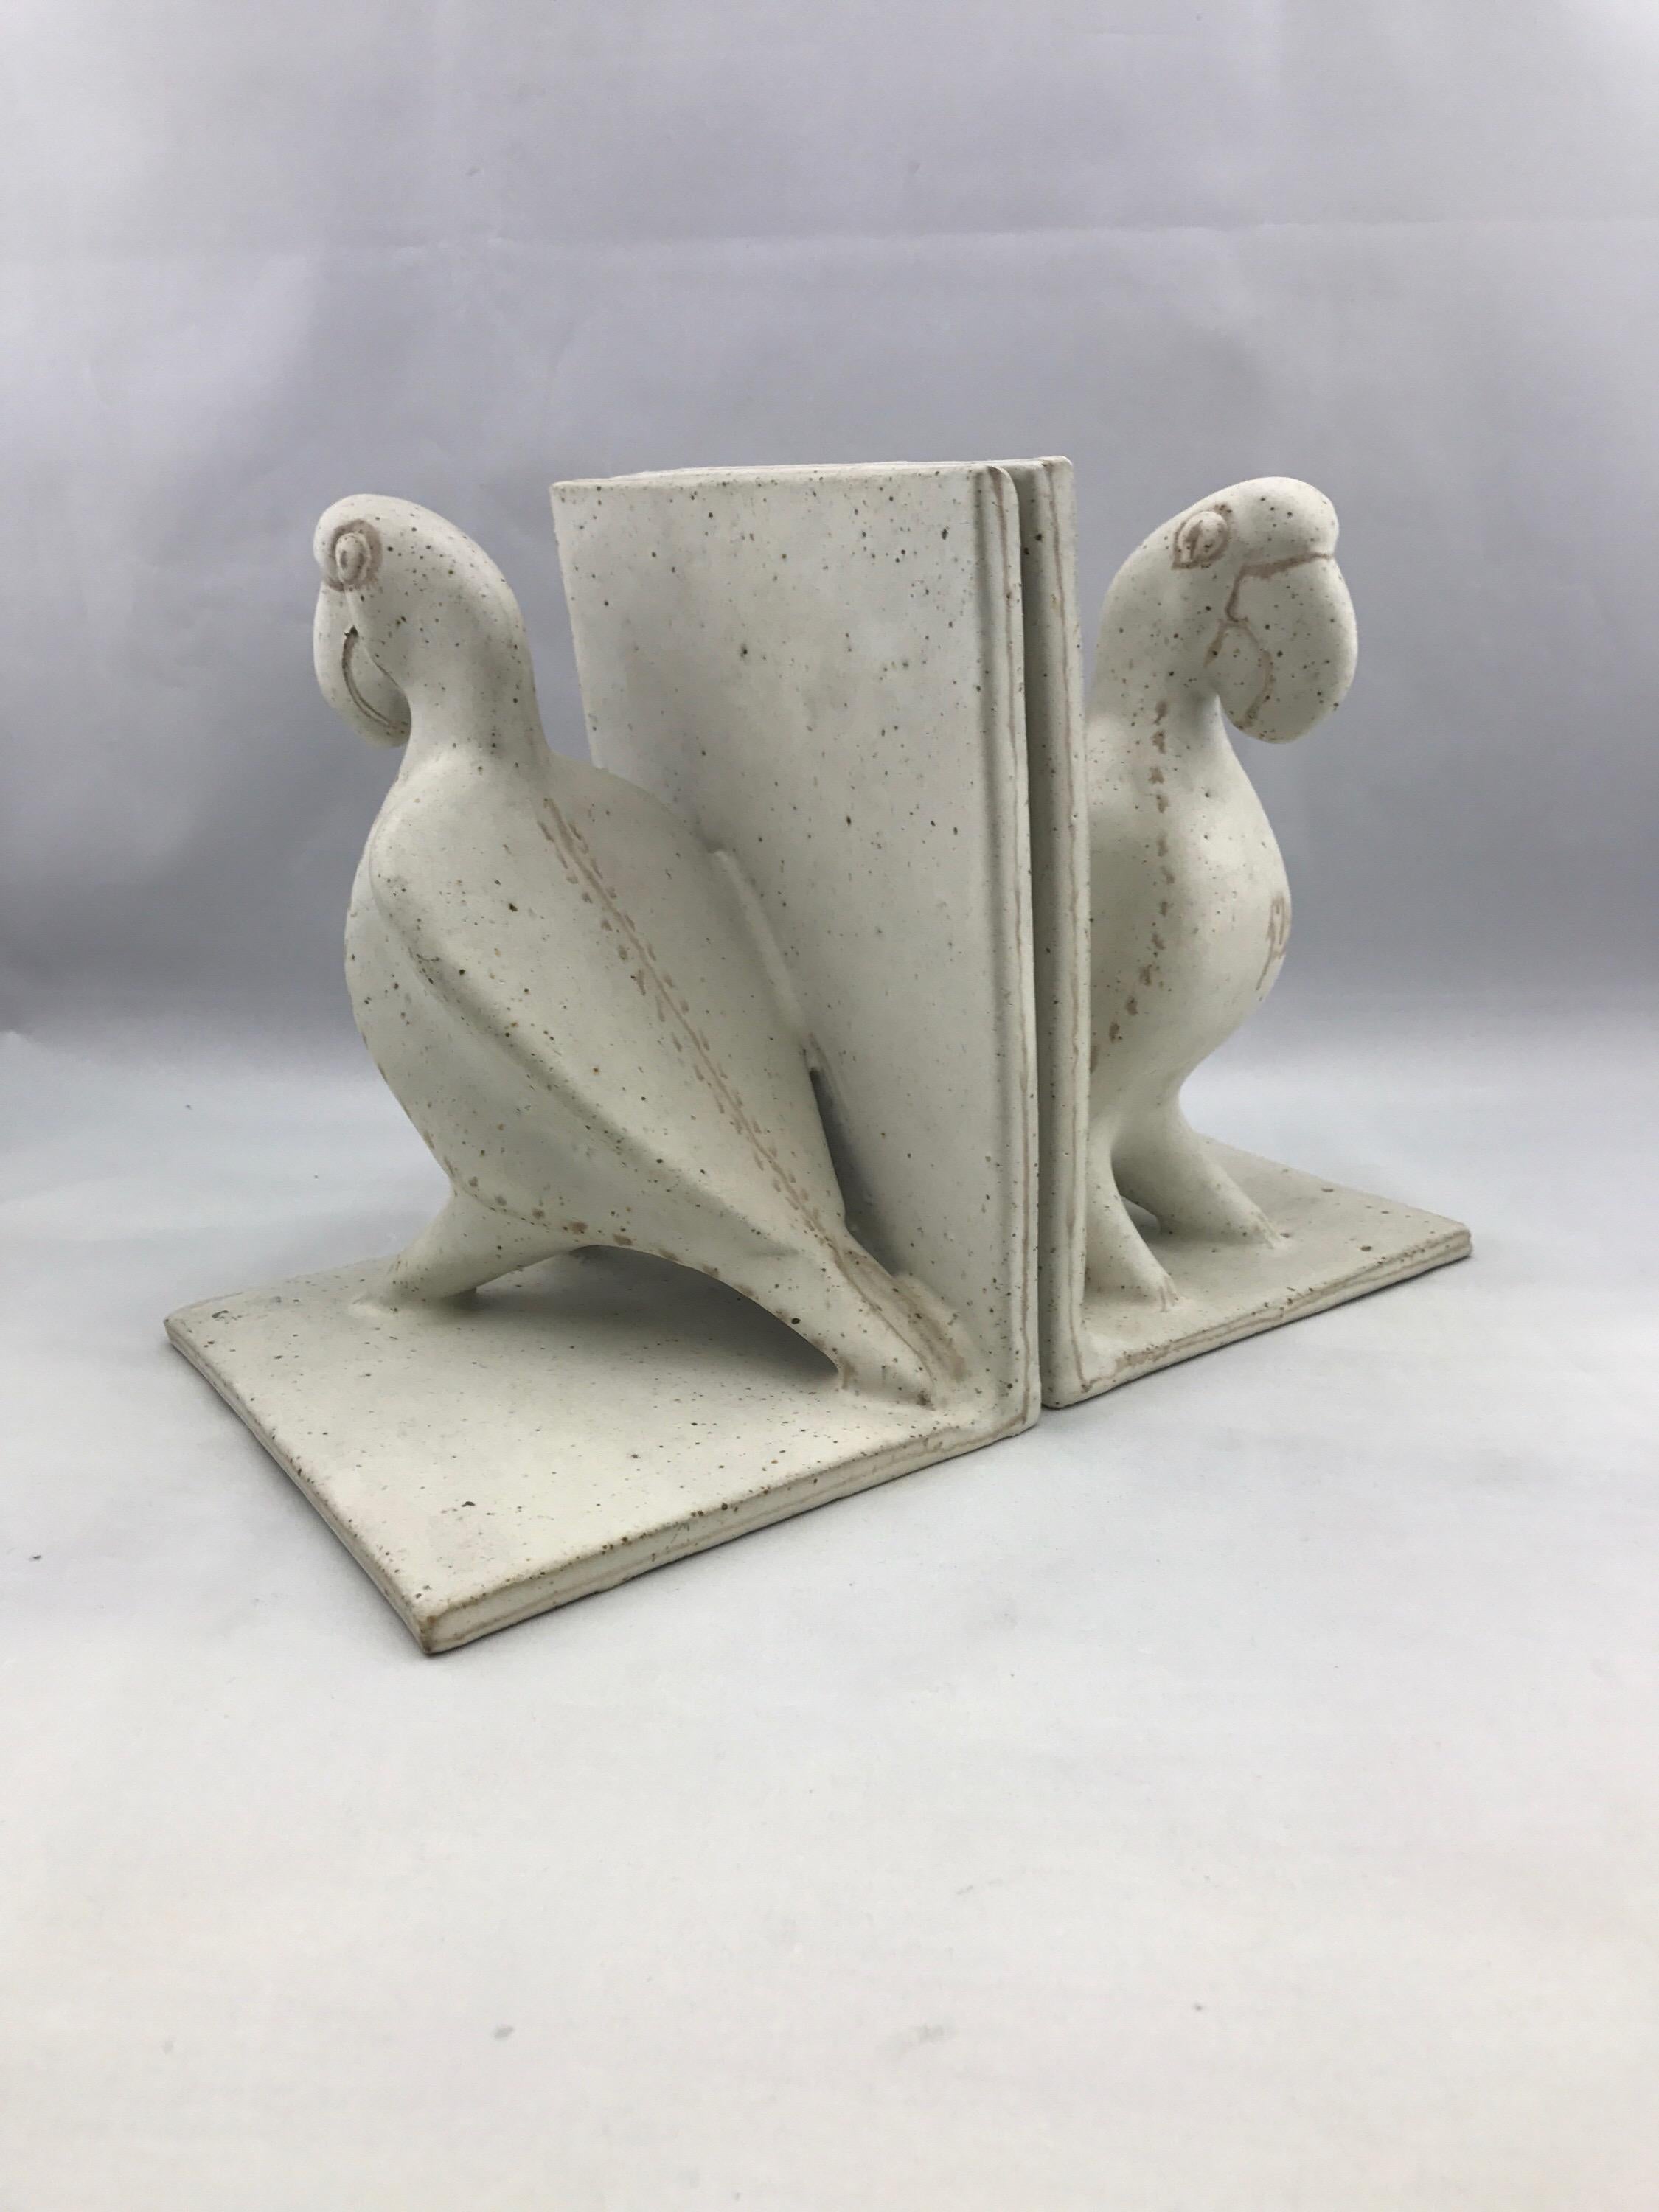 Fantastic Italian ceramic bookends by Bruno Gambone. Excellent condition with no known defects that would detract from value or aesthetics. Ready for use.